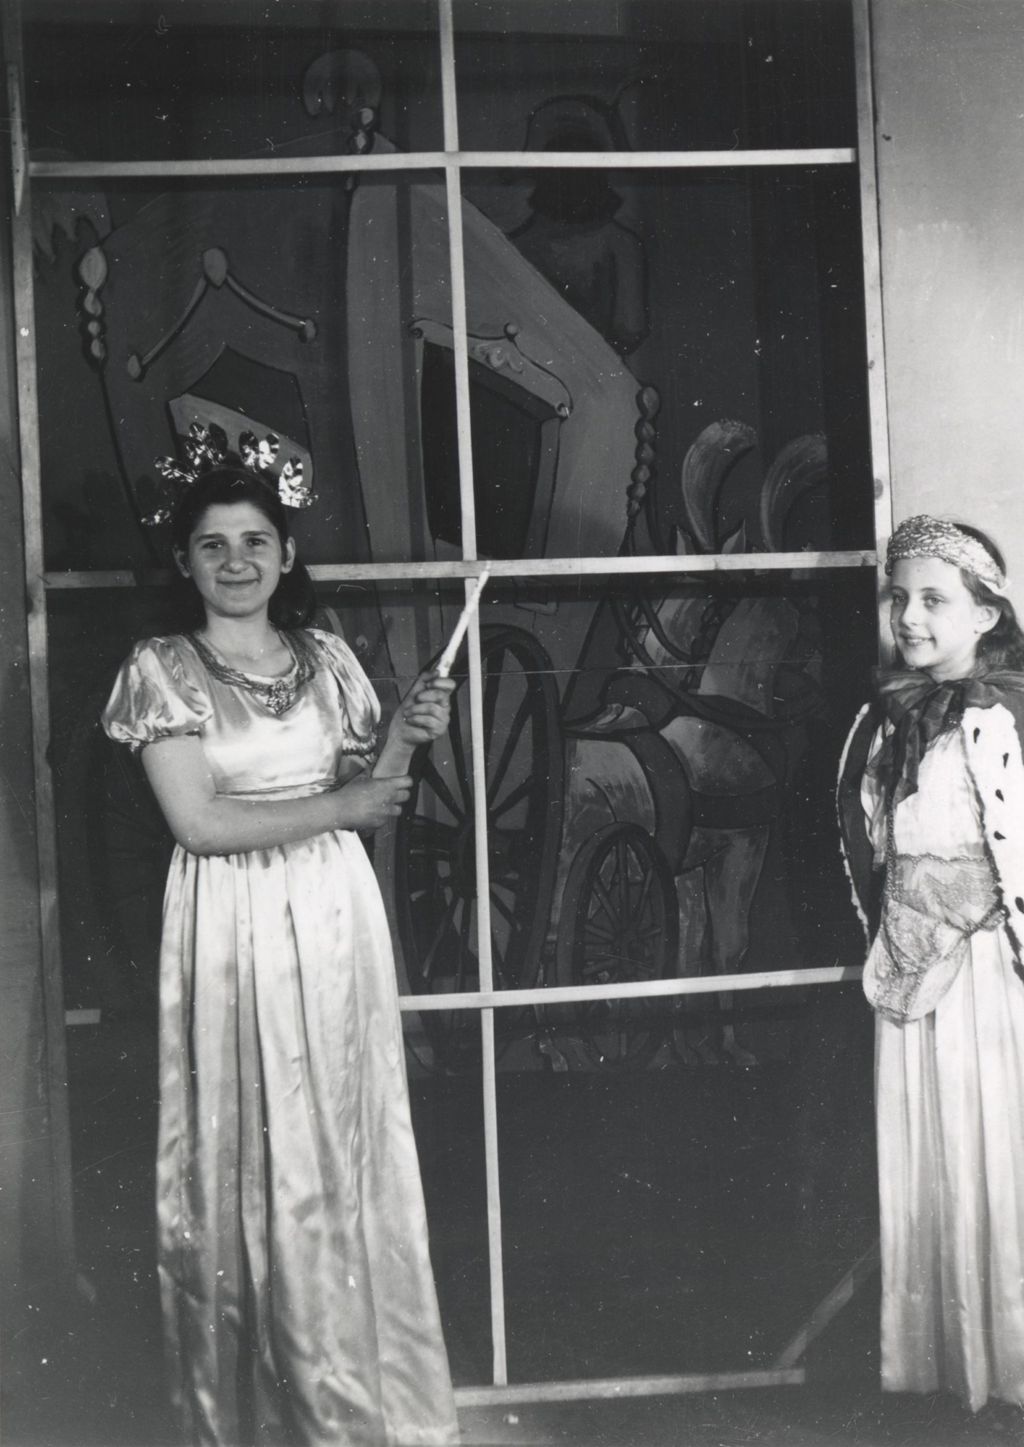 Miniature of Two performers from Hull-House Junior Theatre production of "Cinderella"